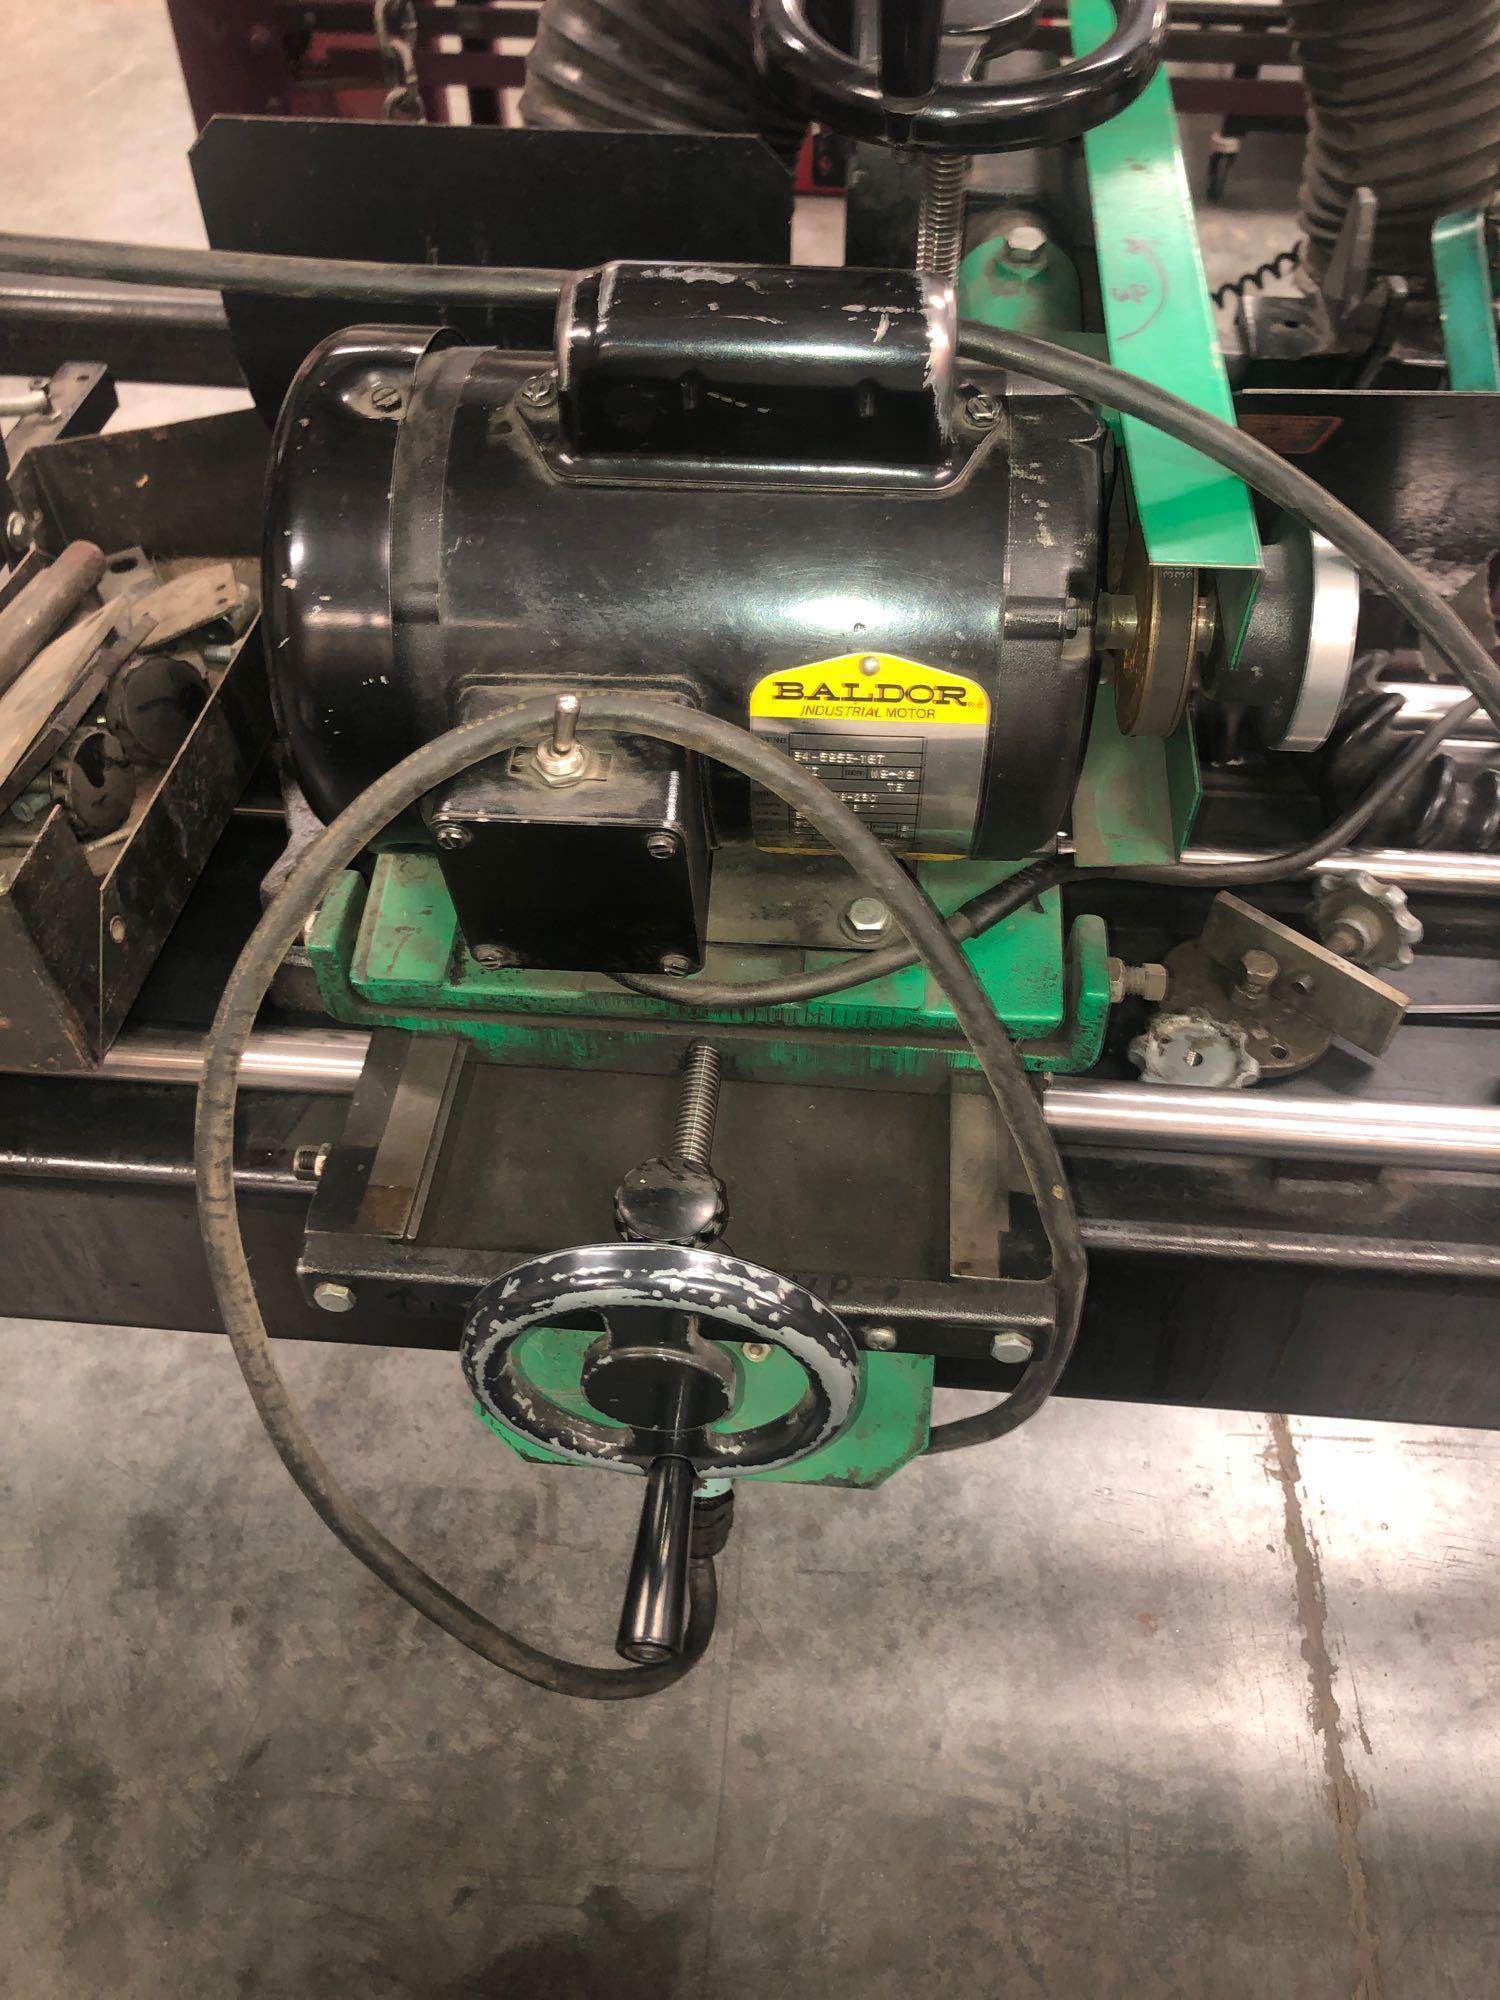 Foley United Model 3096 Accu-Spin Reel Mower Grinder w/ Delta Dust Collector System